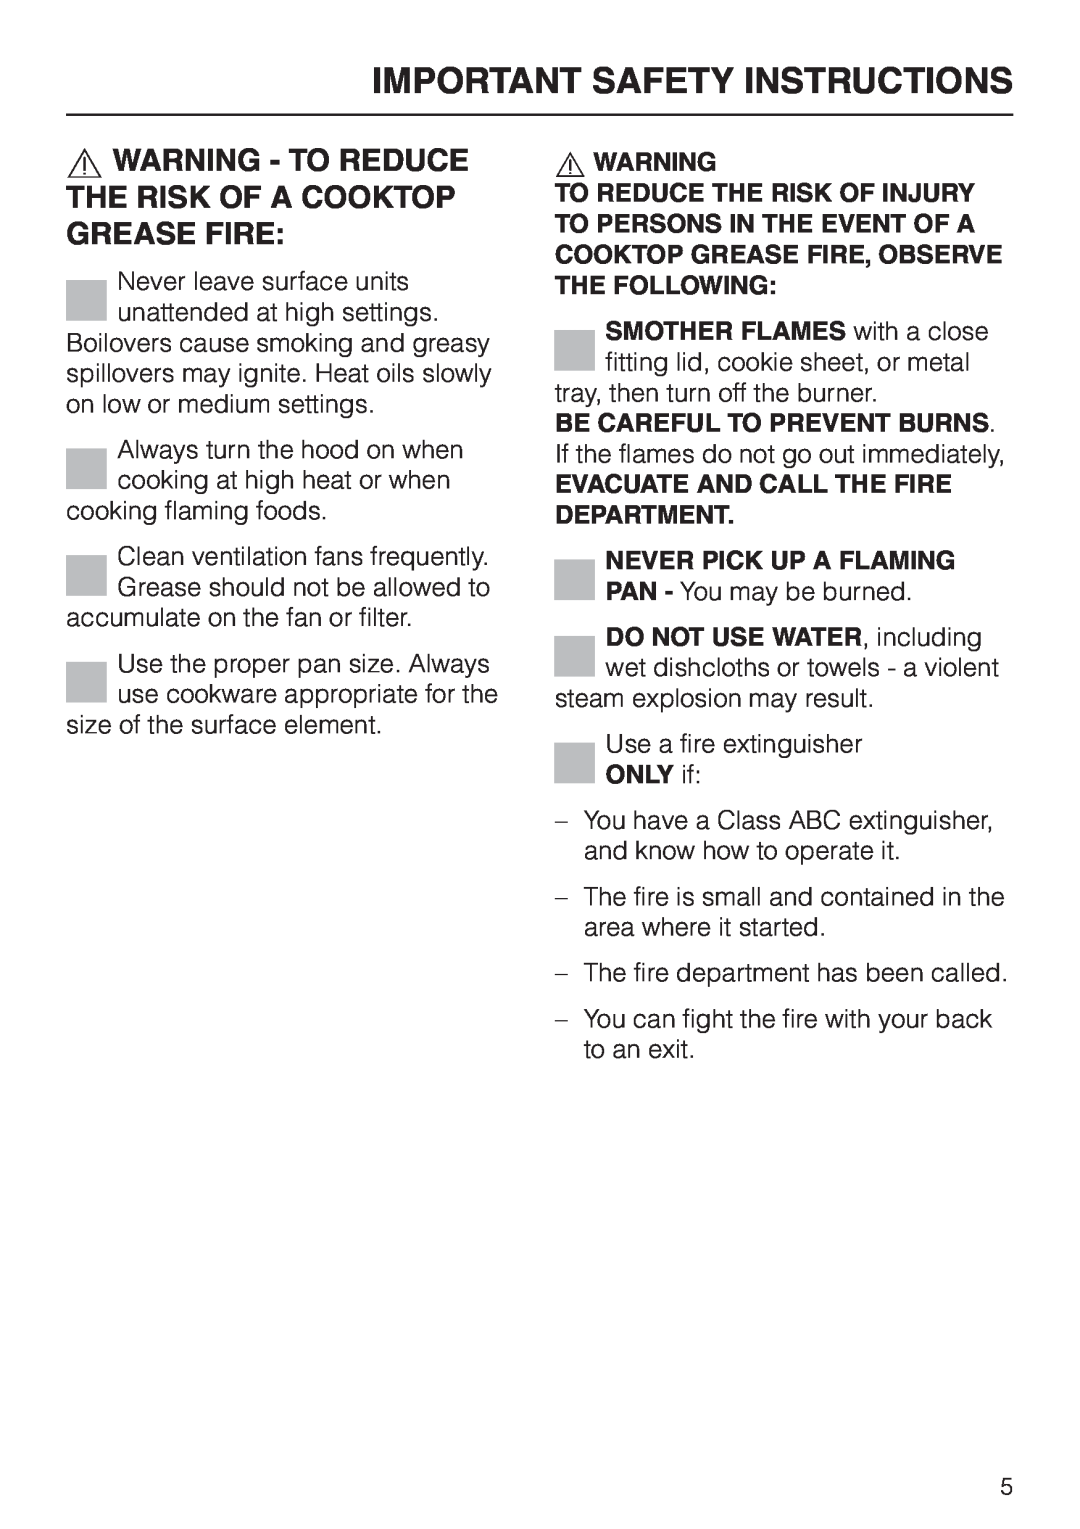 Miele DA 402 Important Safety Instructions, Be Careful To Prevent Burns, Evacuate And Call The Fire Department, ONLY if 